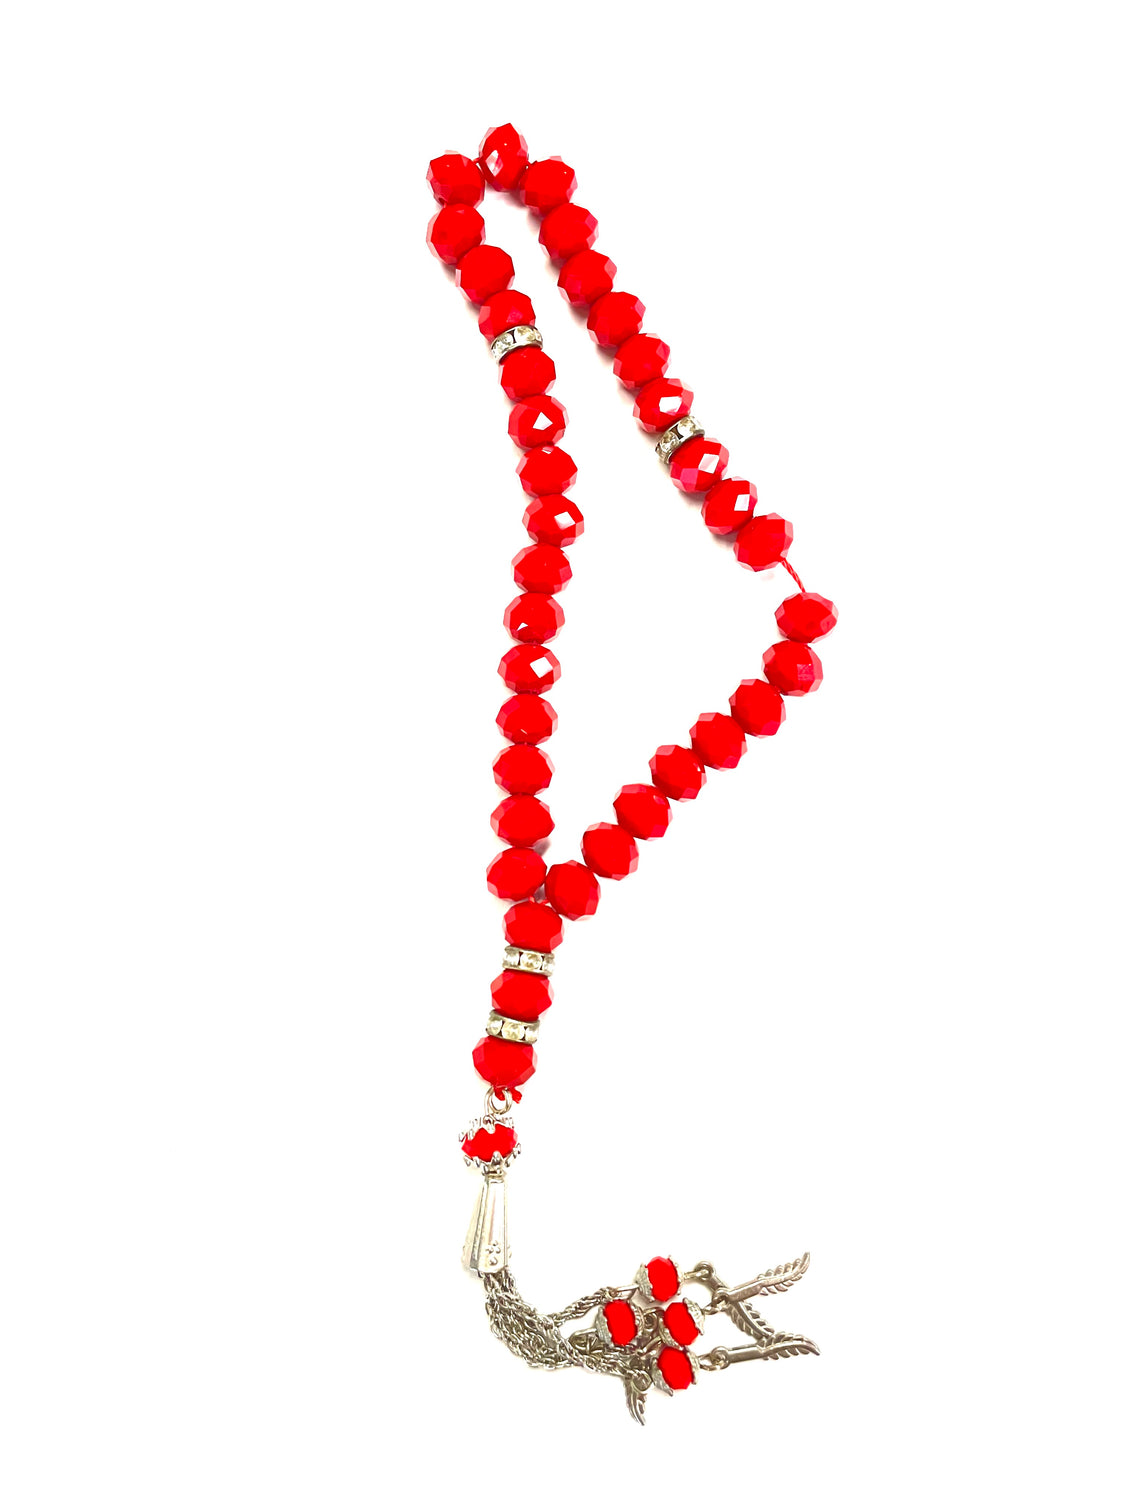 red and silver tasbeeh with 33 beads